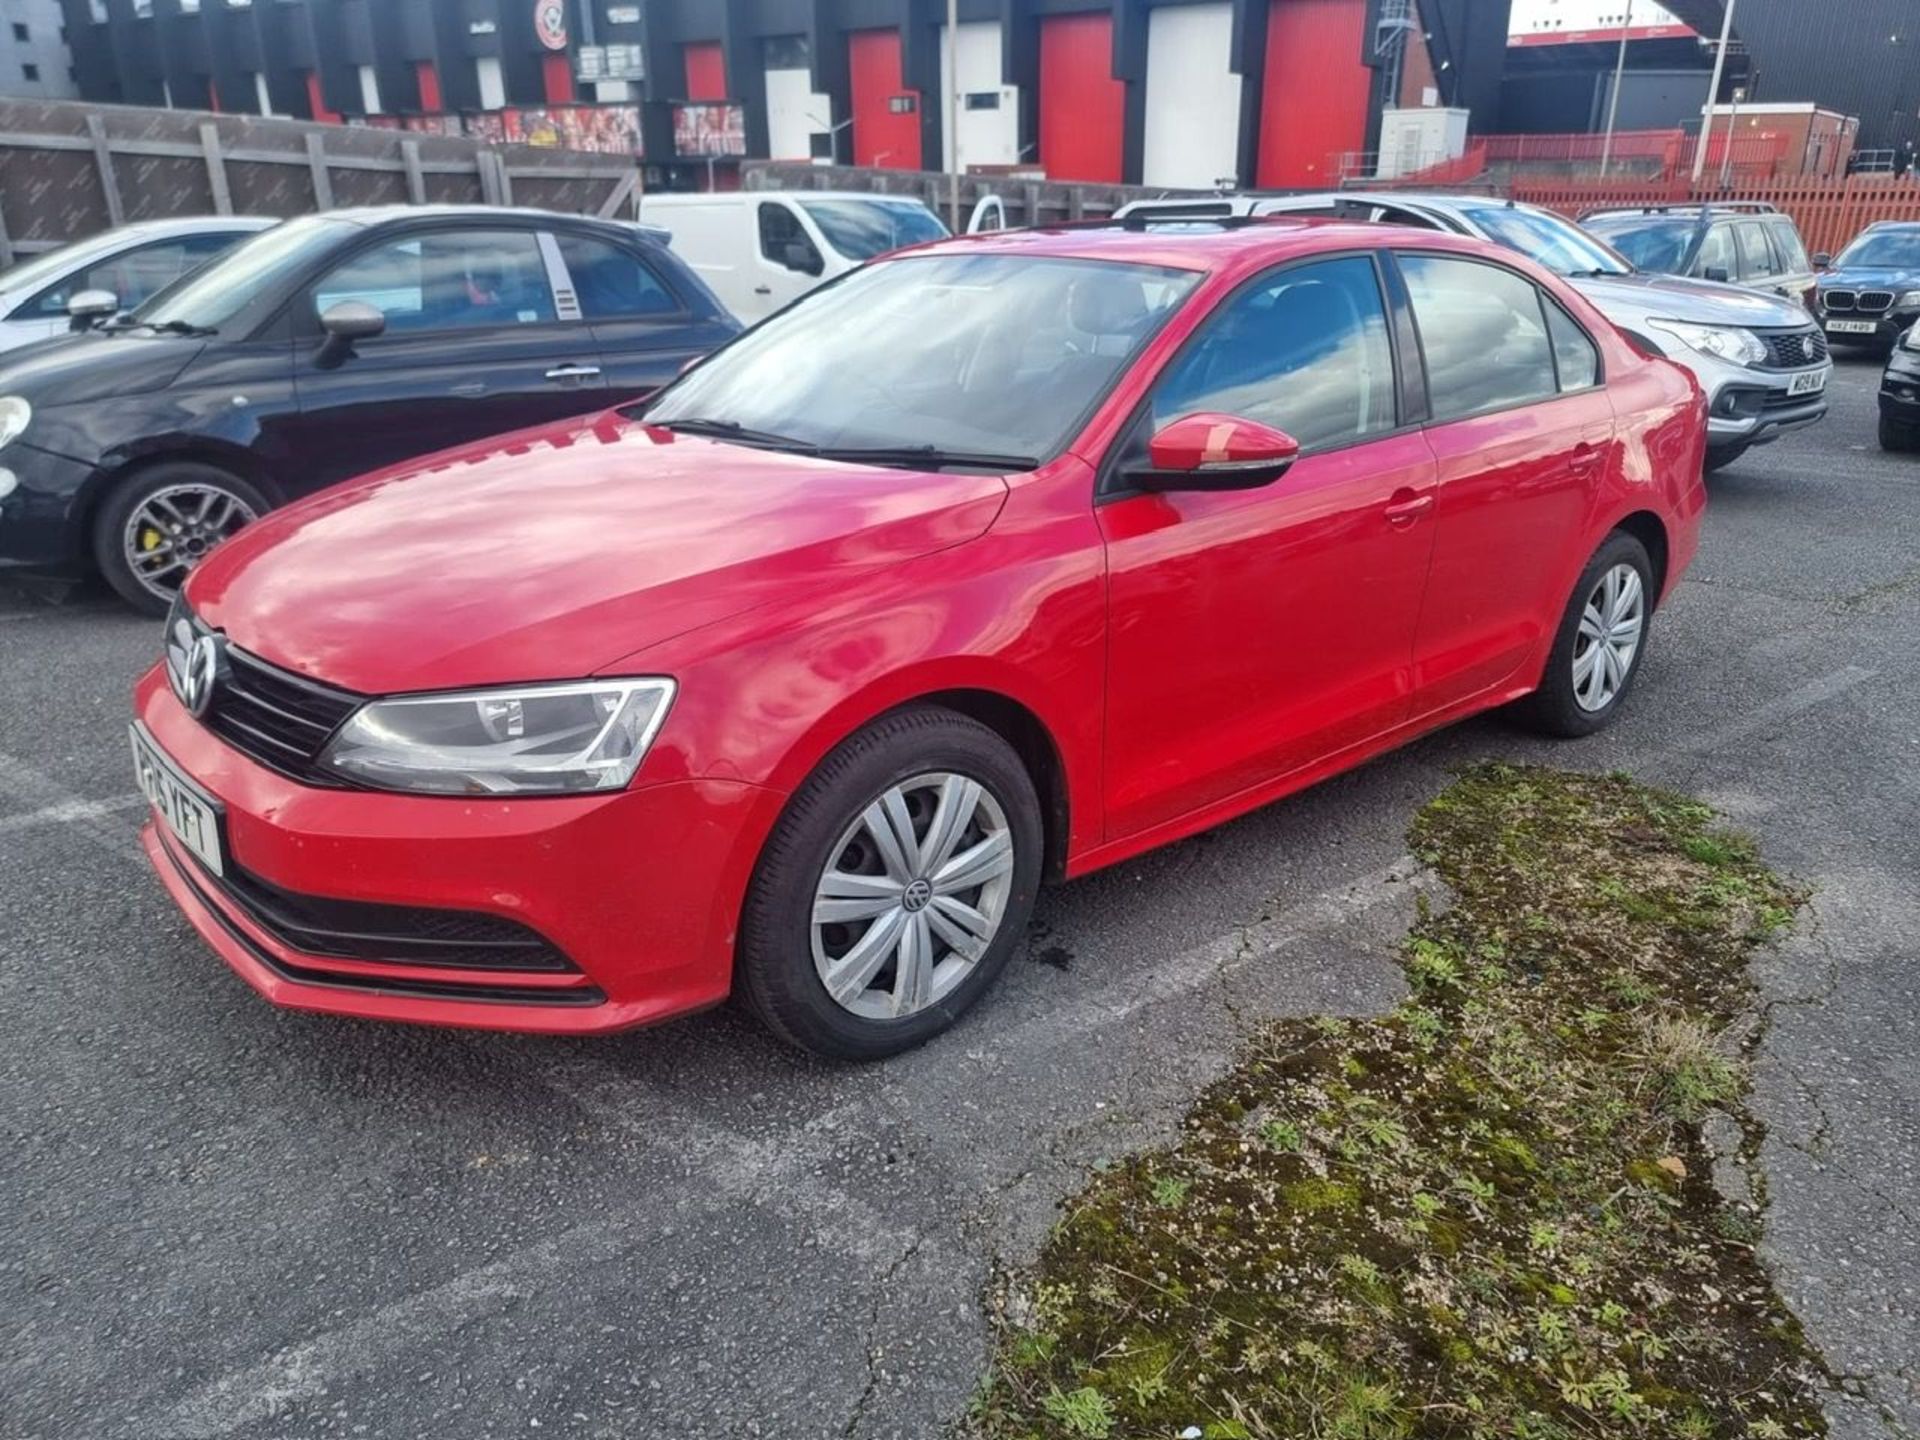 PF15 YFTVOLKSWAGEN JETTA 1.4 TSI 125 S Saloon. Date of registration: 21/07/2015 Comes with 1 key - Image 5 of 8